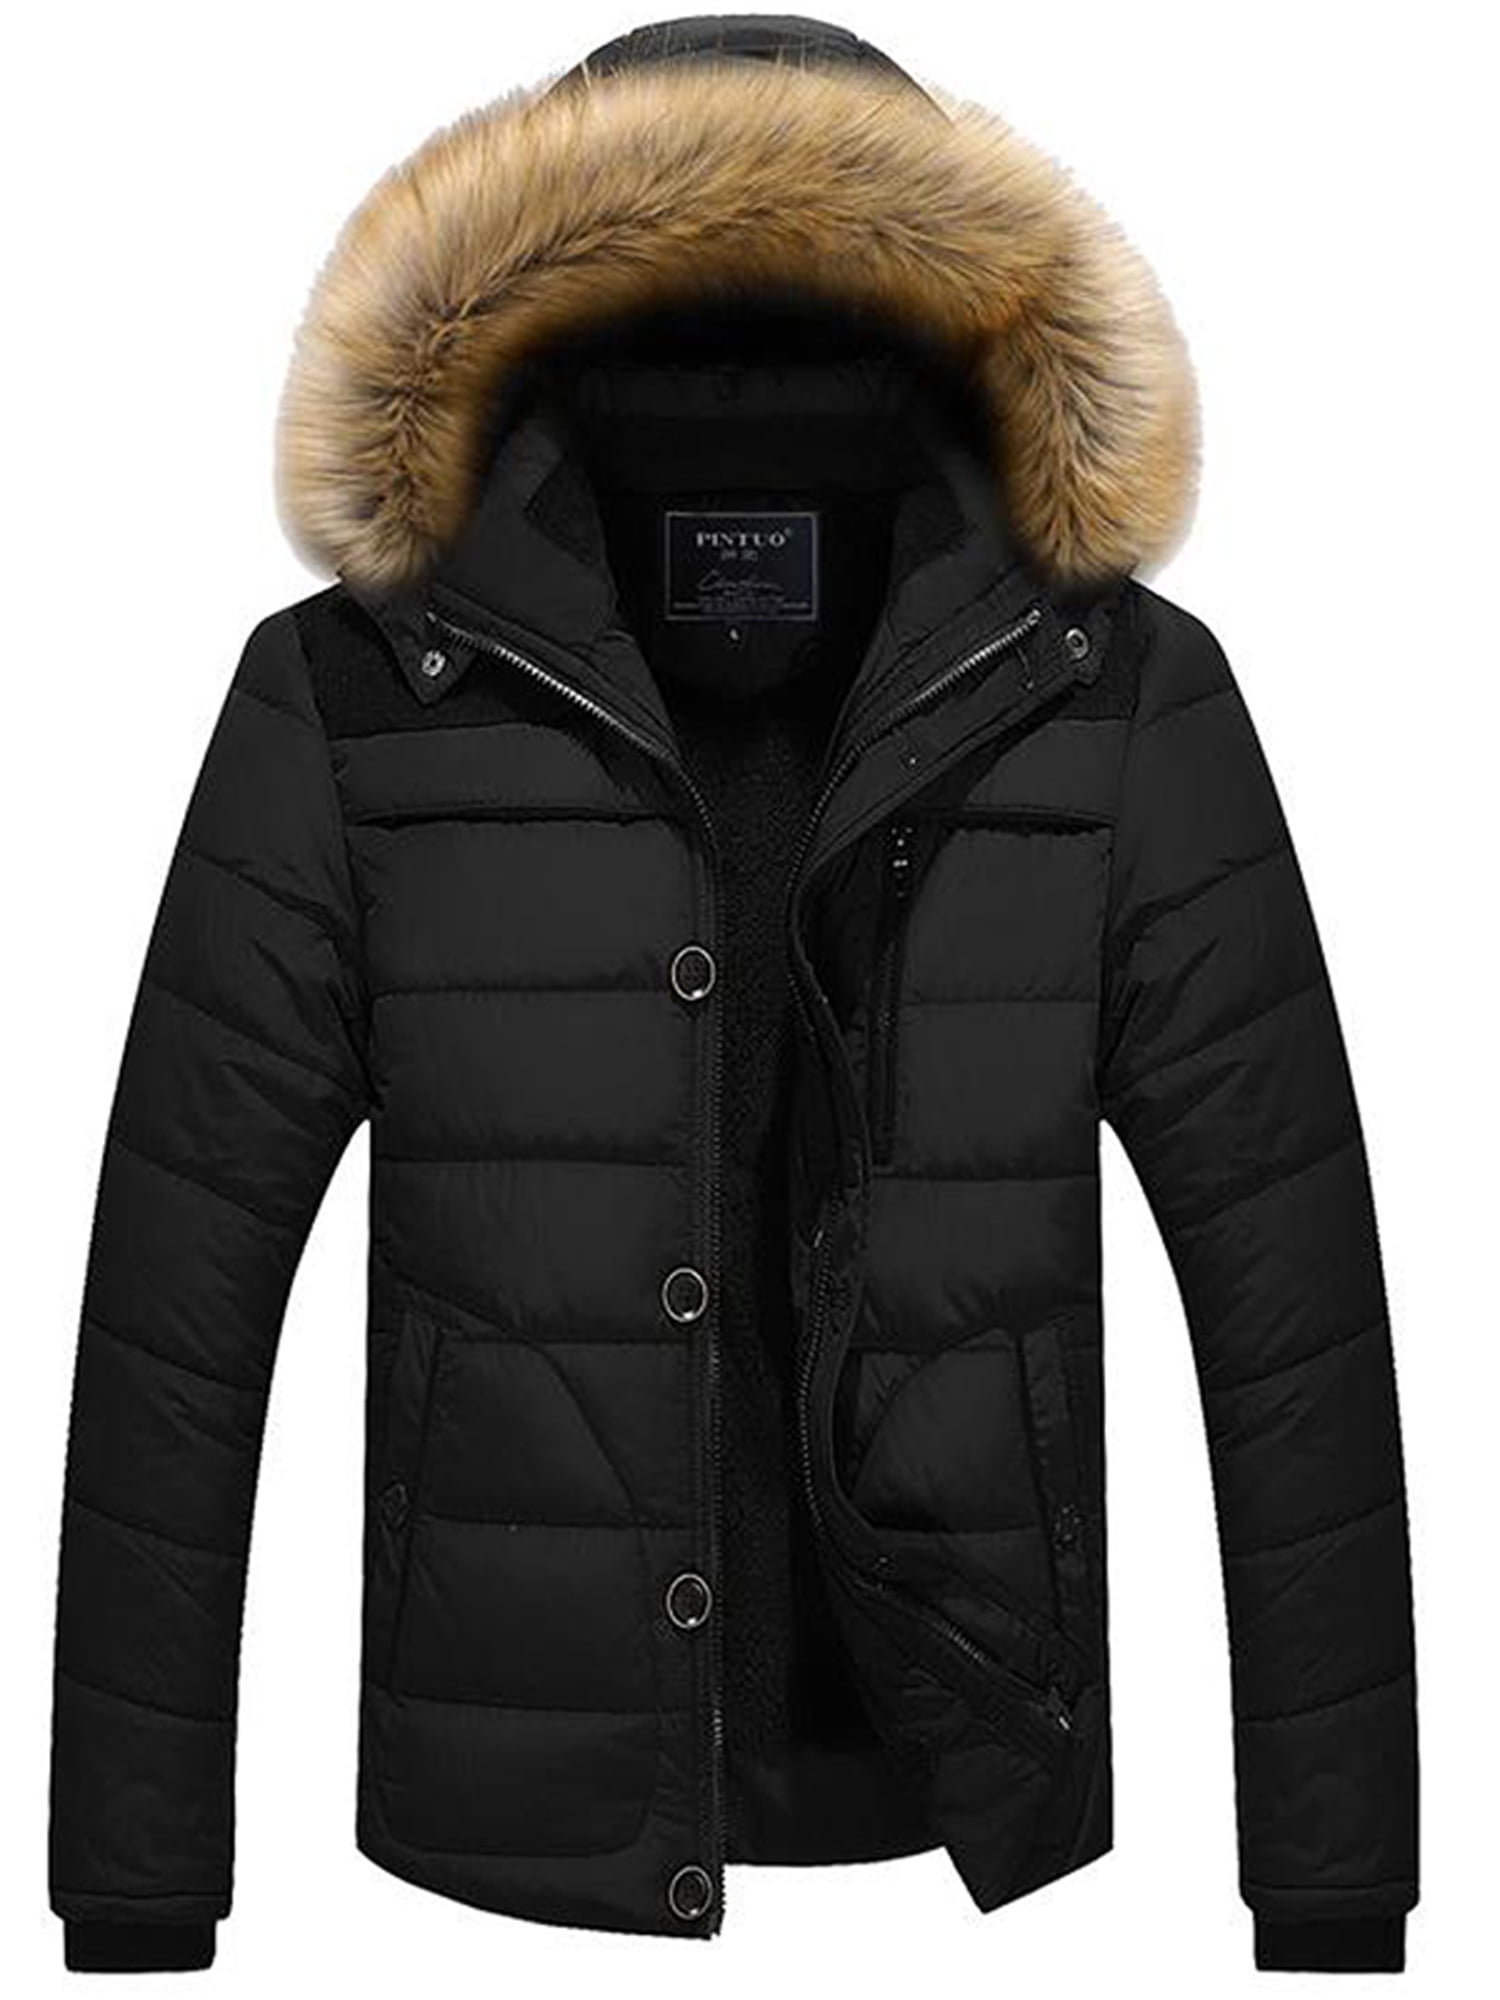 Mens Trench Coat Furry Collar Hooded Winter Warm Parka Padded Jacket Zip Outwear